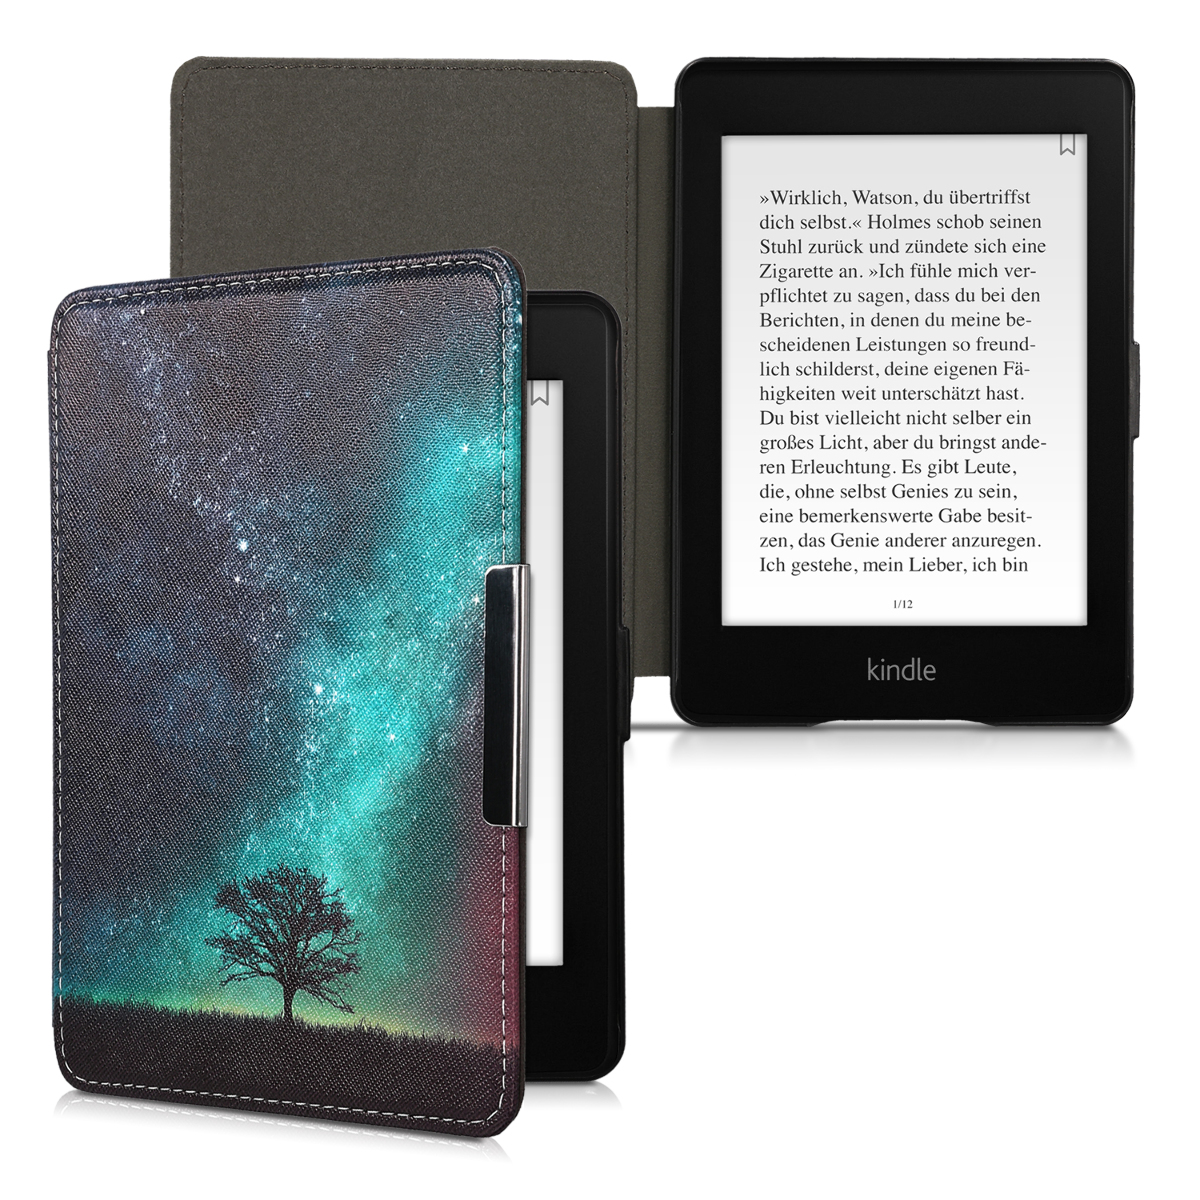 kindle paperwhite cases